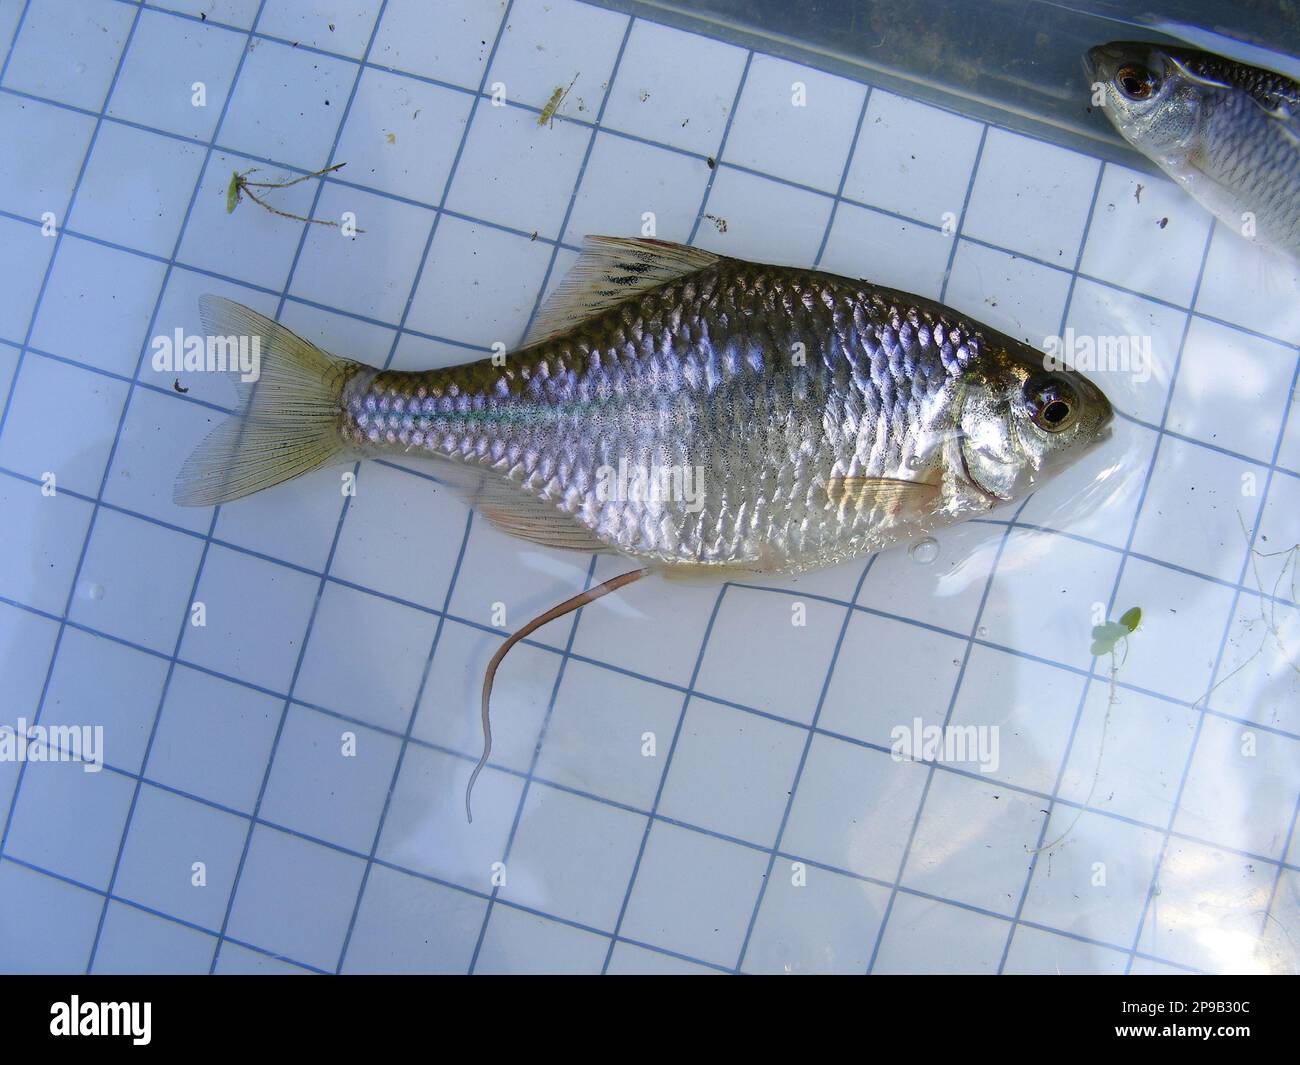 The Amur bitterling (Rhodeus sericeus) is a small fish of the carp family on the background of a 5 mm measurement grid. Ichthyology research. Stock Photo